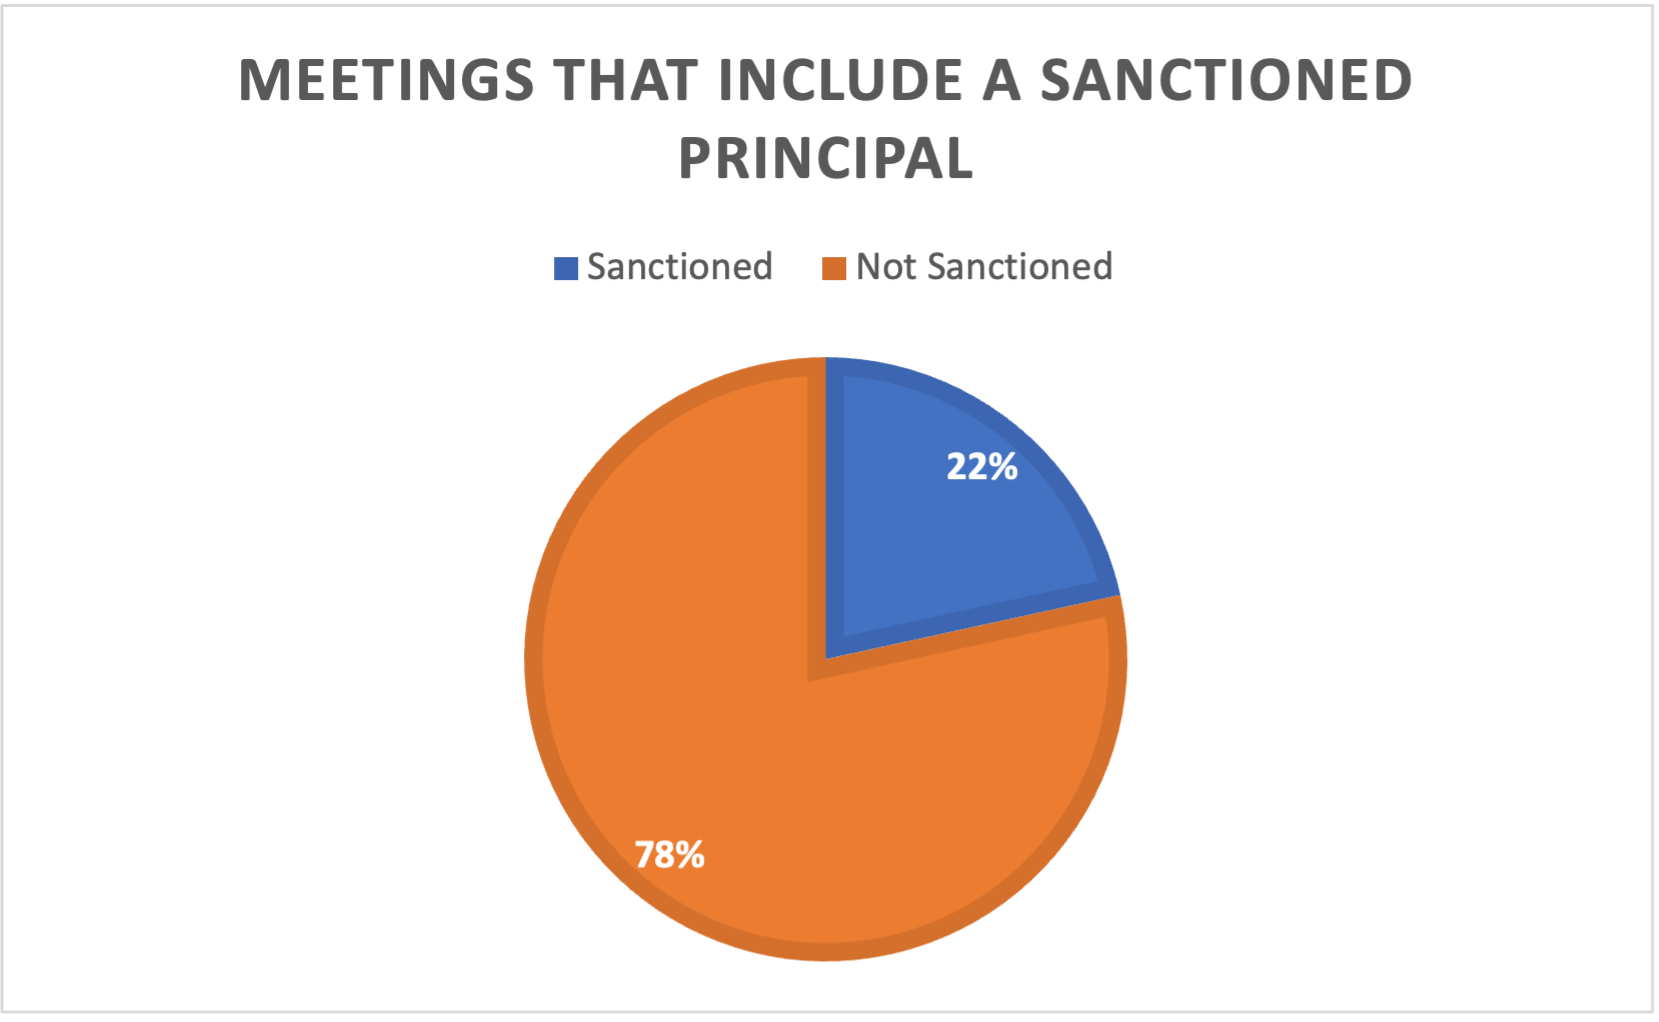 Meetings that include a sanctioned principal